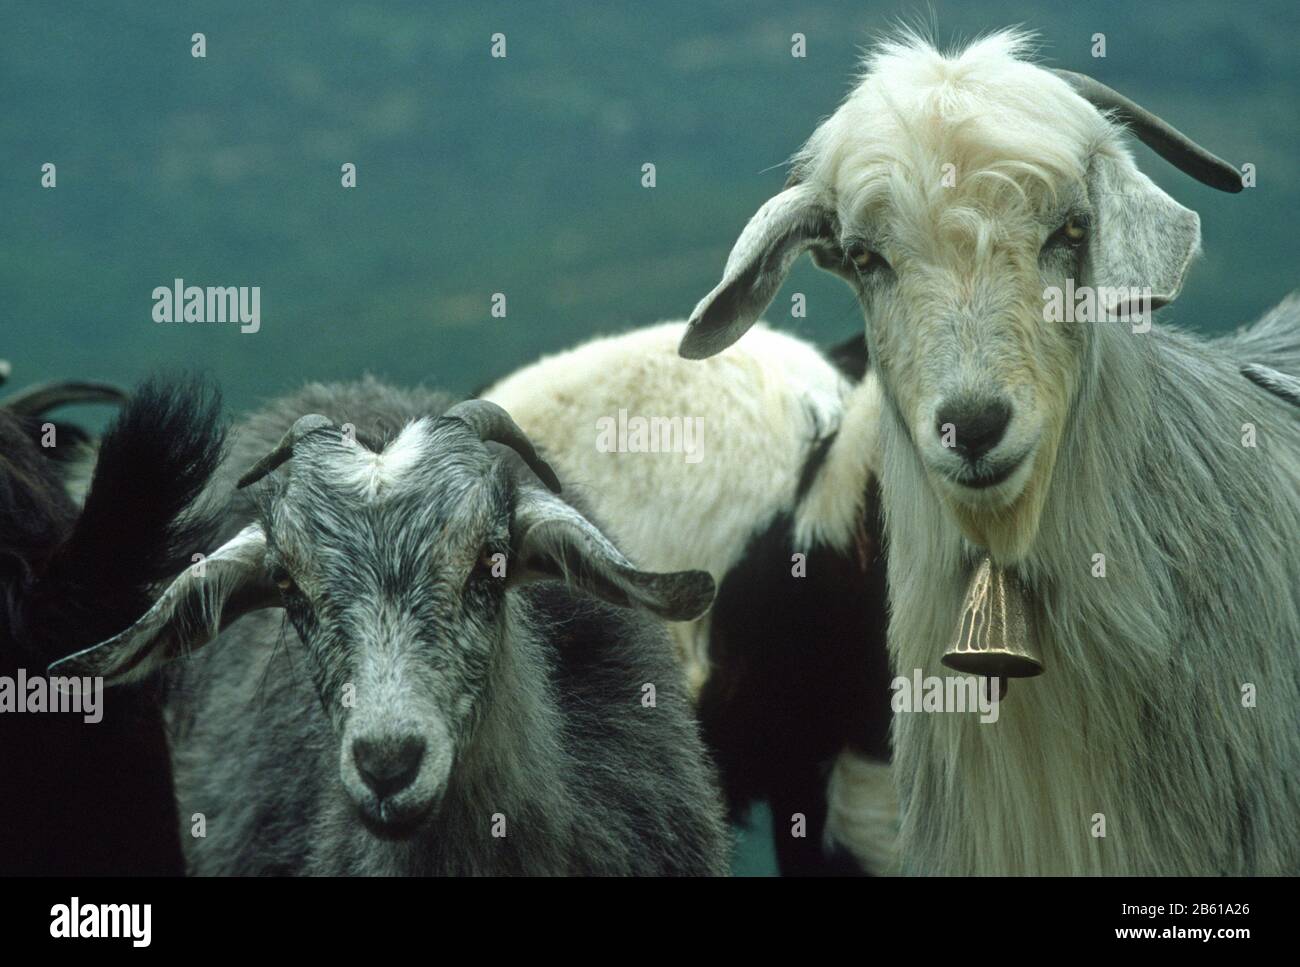 White, grey, brown and black goats in Epirus, Greece. One has a brass bell on a collar. Stock Photo